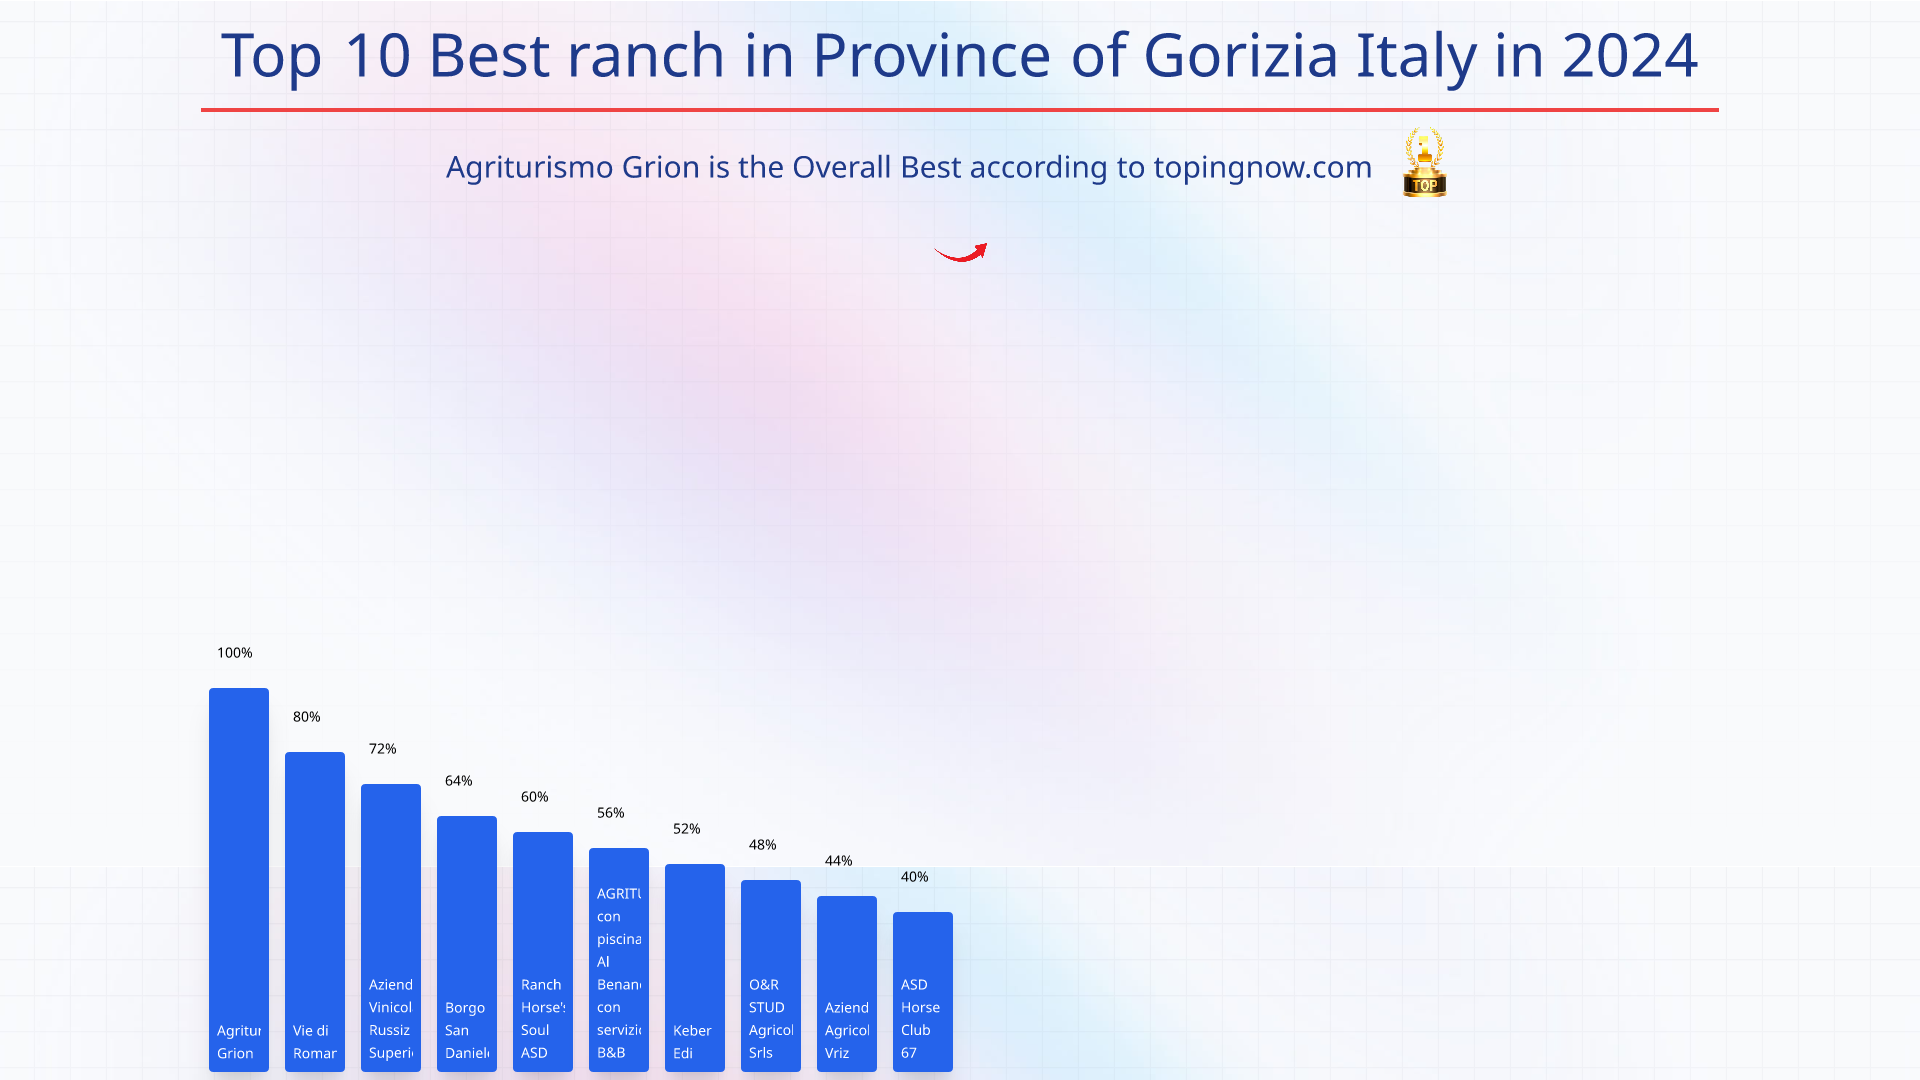 Top 10 Best ranch in Province of Gorizia Italy in 2024: Top 10 Best ranch in Province of Gorizia Italy in 2024